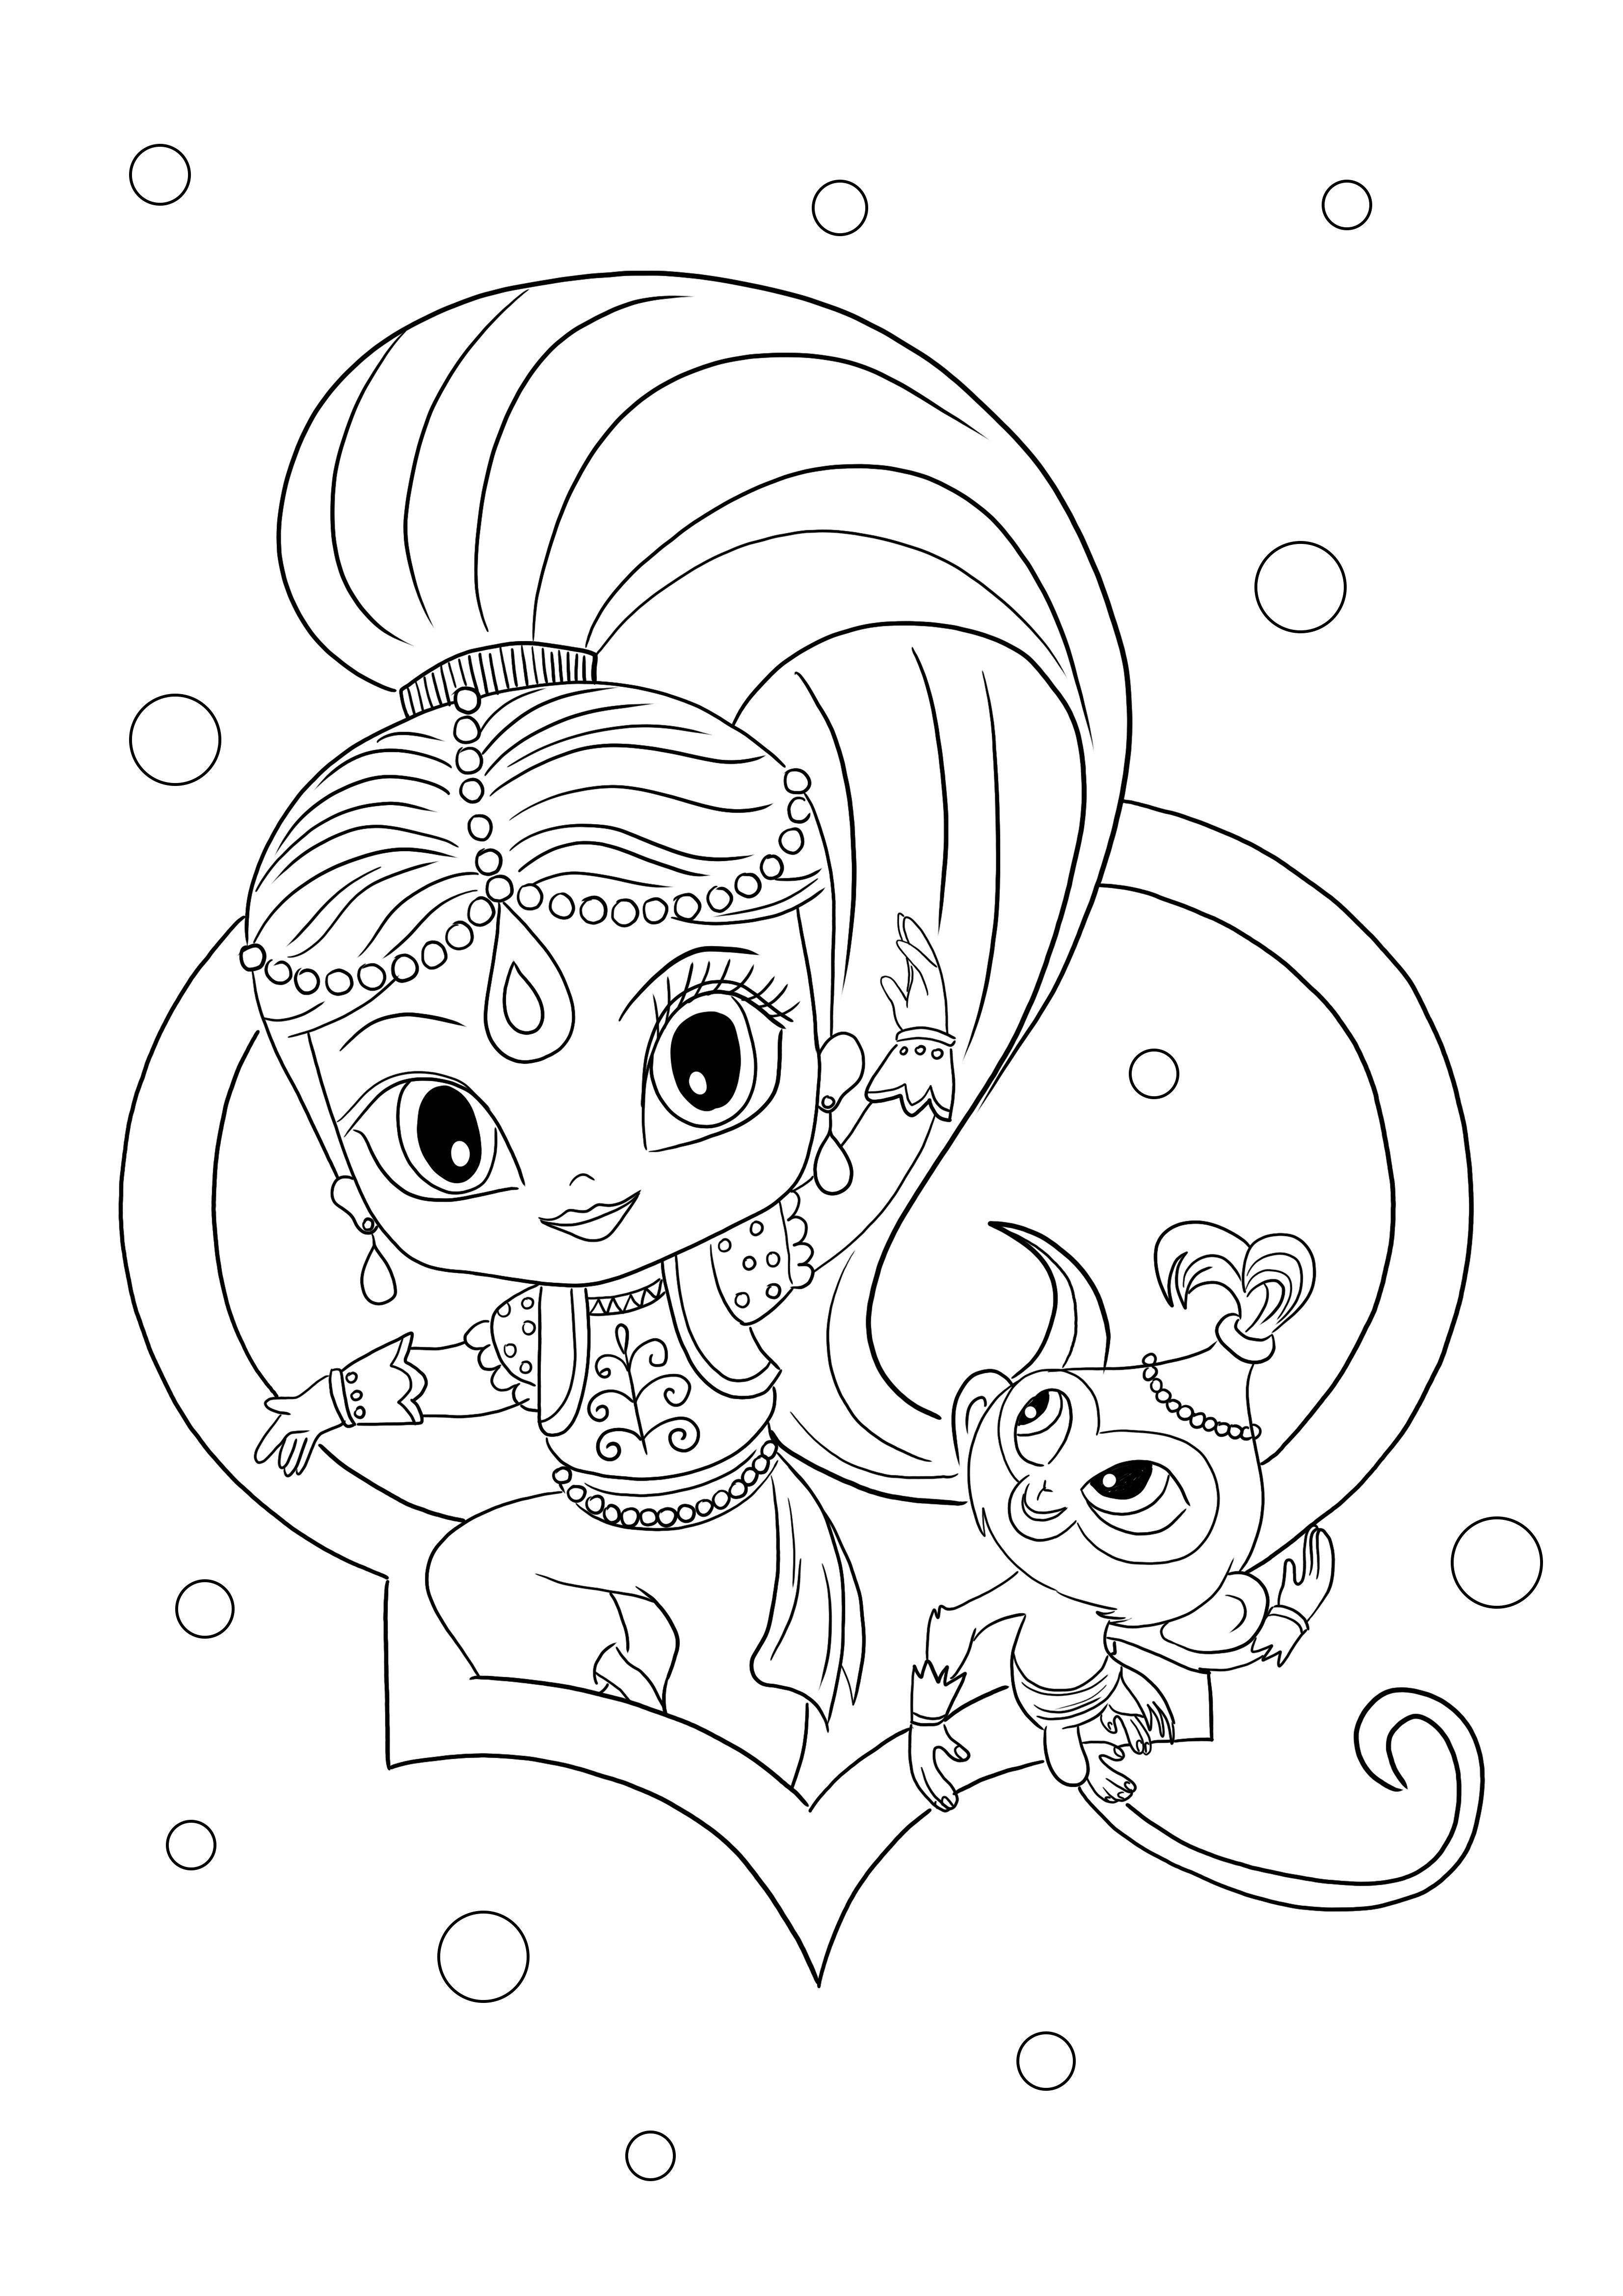 Shimmer and Tala- free printable easy to color and learn with fun page